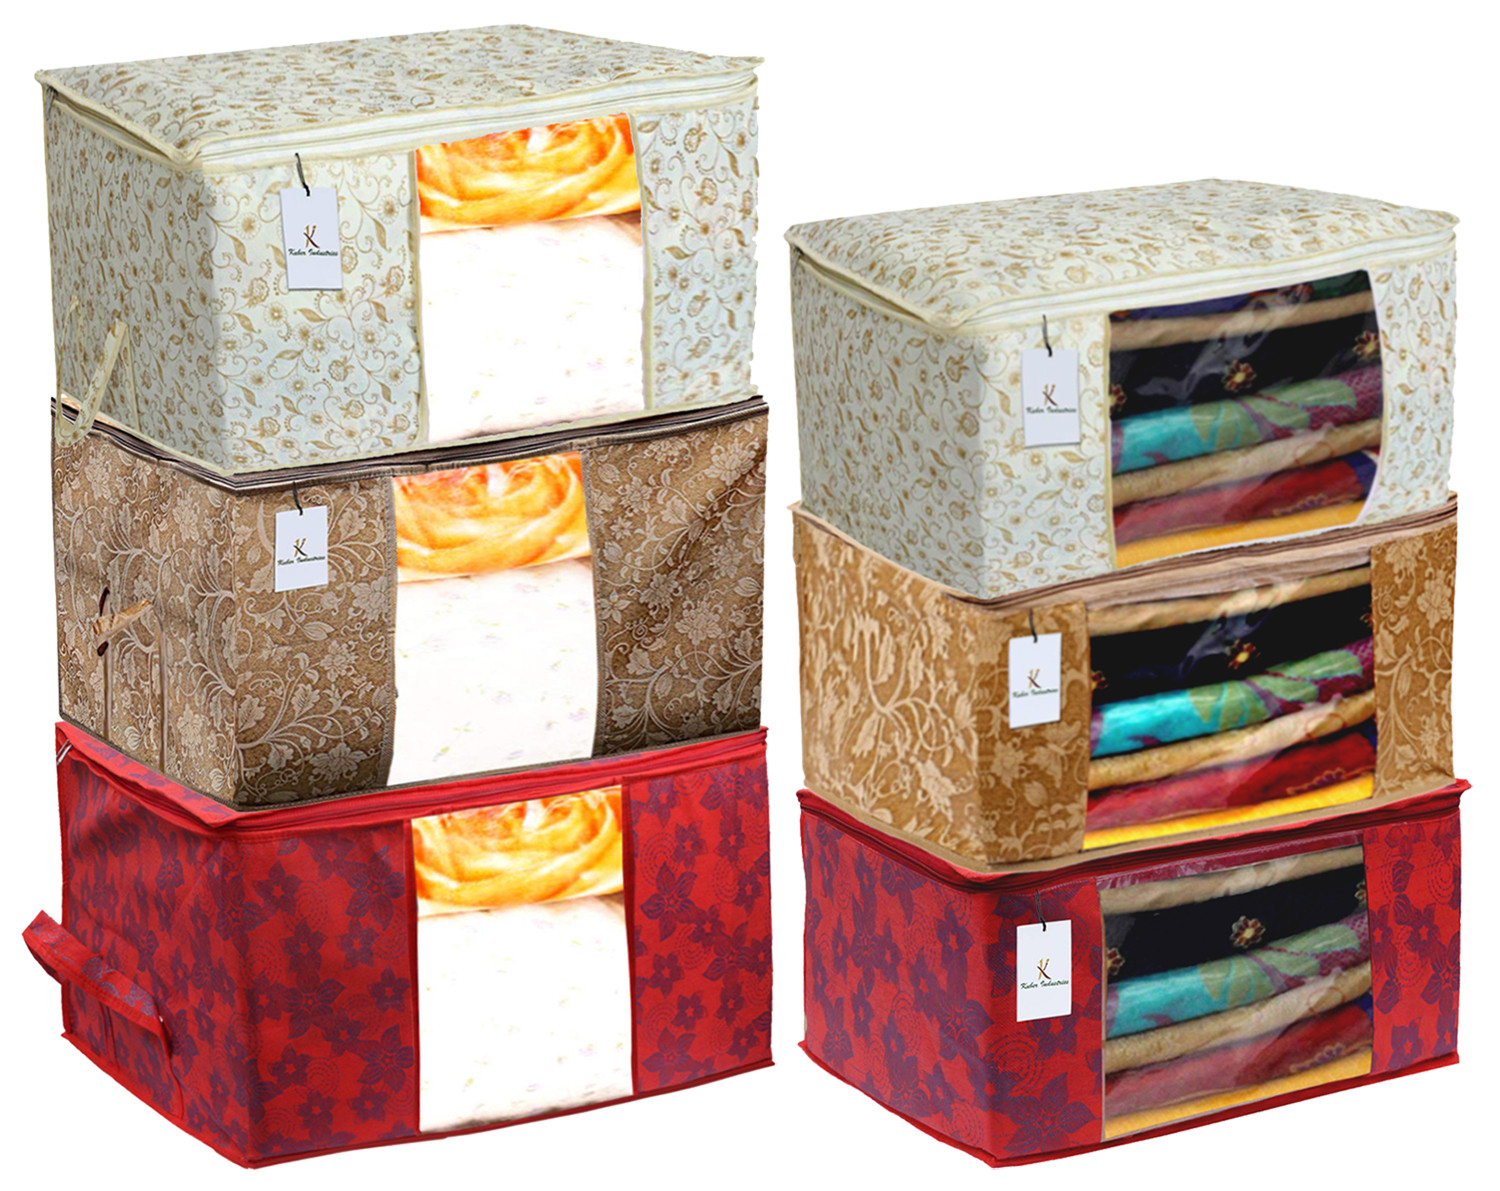 Kuber Industries Metalic Printed Non Woven Saree Cover And Underbed Storage Bag, Storage Organiser, Blanket Cover, Red & Beige & Brown  -CTKTC42399